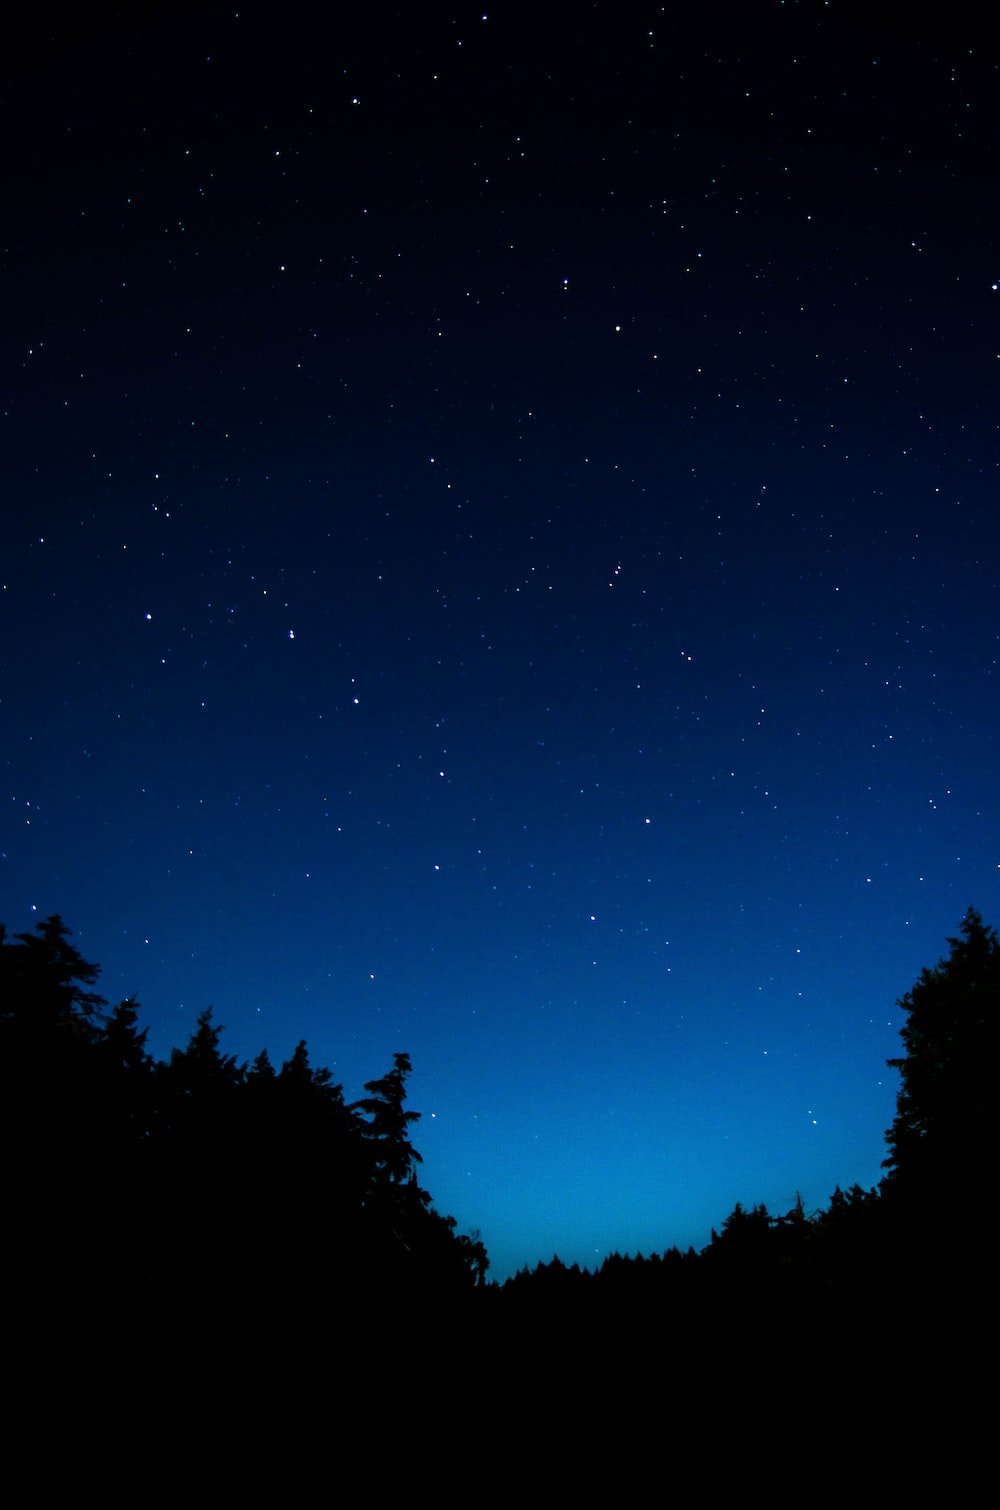 Blue Night Sky Picture. Download Free Image